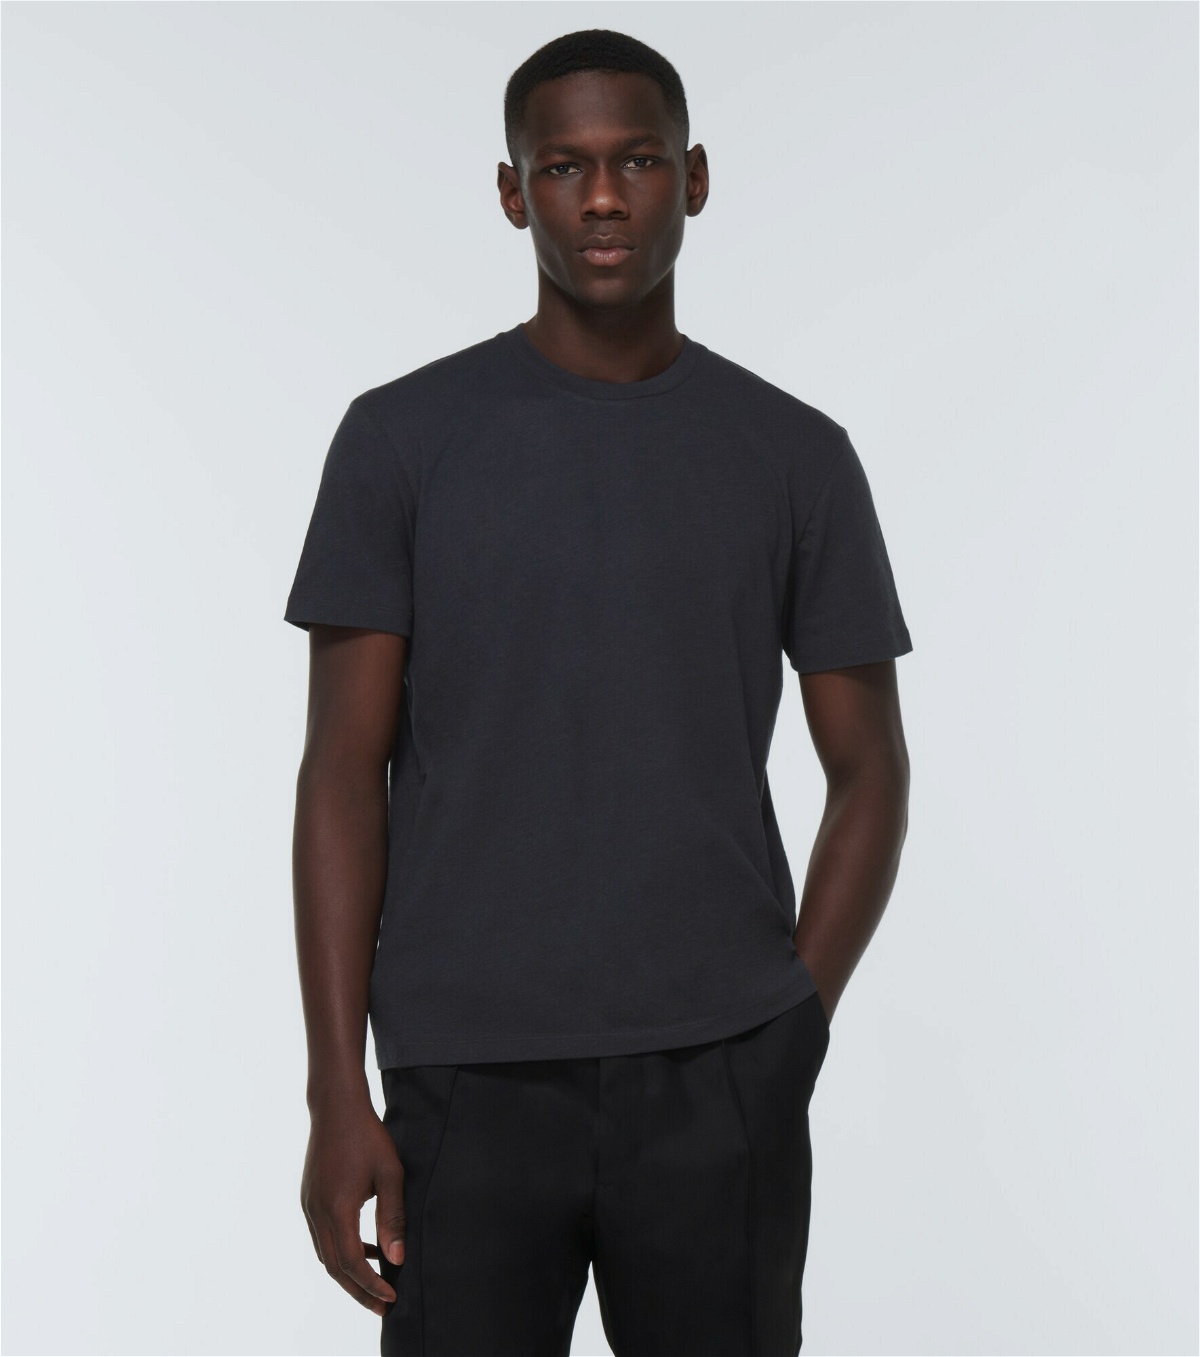 Tom Ford - Cotton-blend jersey T-shirt TOM FORD